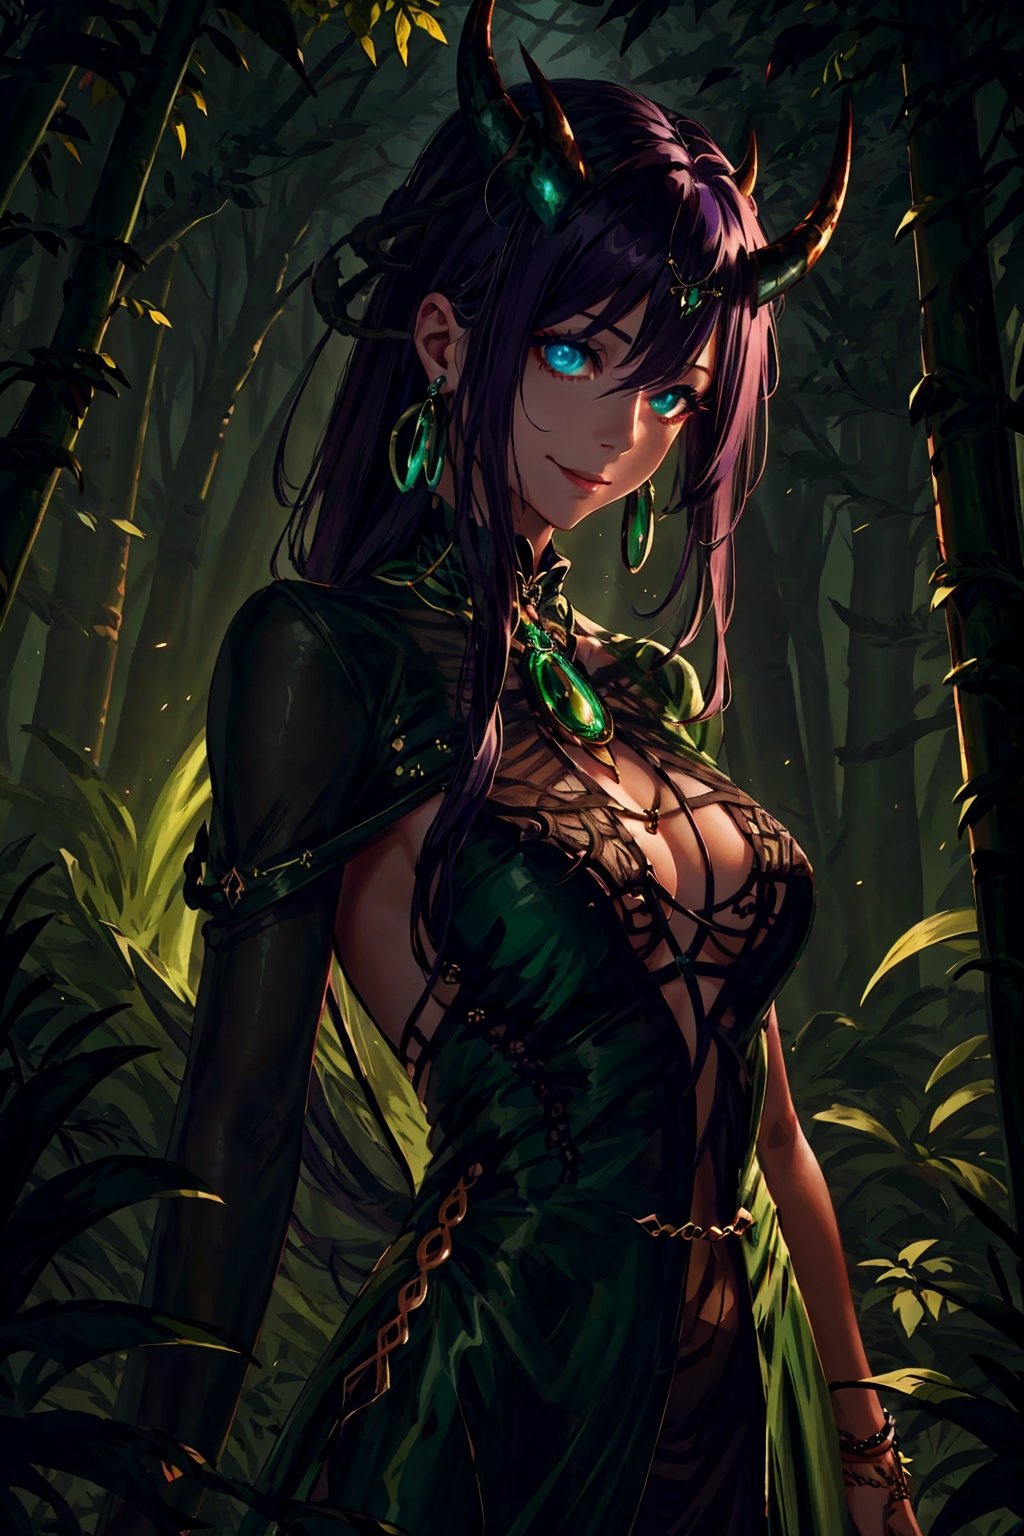 Imagine a beautiful woman with long and wild dark purple hair hair flowing freely around her. She has short horns. Her dragon eyes are bright green, sparkling with intricate detail. She smiles like she is scheming something. She wears a gorgeous dress with a fine touch and she wears fine jewelery. The background is a creepy forest with dim lighting, creating an ominous ambiance. She is surrounded by sparking magic. This artwork captures a creepy atmosphere against the backdrop of a beautiful yet dimly lit setting, detailed, detail_eyes, detailed_hair, detailed_scenario, detailed_hands, detailed_background. girl, fine clothing, 